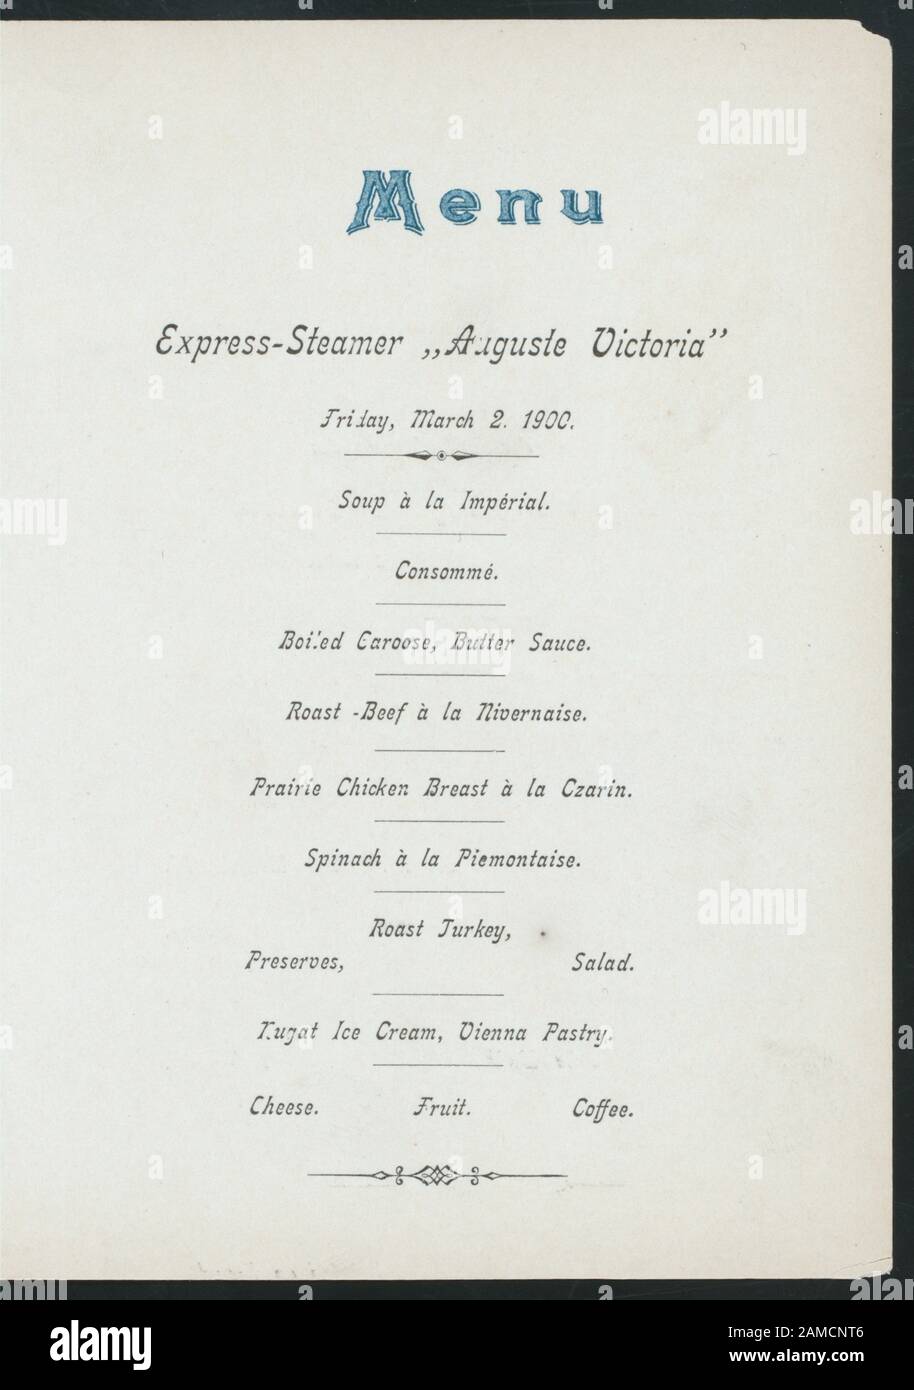 SUPPER (held by) HAMBURG-AMERIKA LINIE (at) SS AUGUSTE VICTORIA (SS;)  MENU LISTED IN GERMAN AND ENGLISH;MUSICIAN PLAYING TROMBONE;PICTURES OF JERUSALEM AND JAFFA;MUSICAL PROGRAM 1900-2229; SUPPER [held by] HAMBURG-AMERIKA LINIE [at] SS AUGUSTE VICTORIA (SS;) Stock Photo